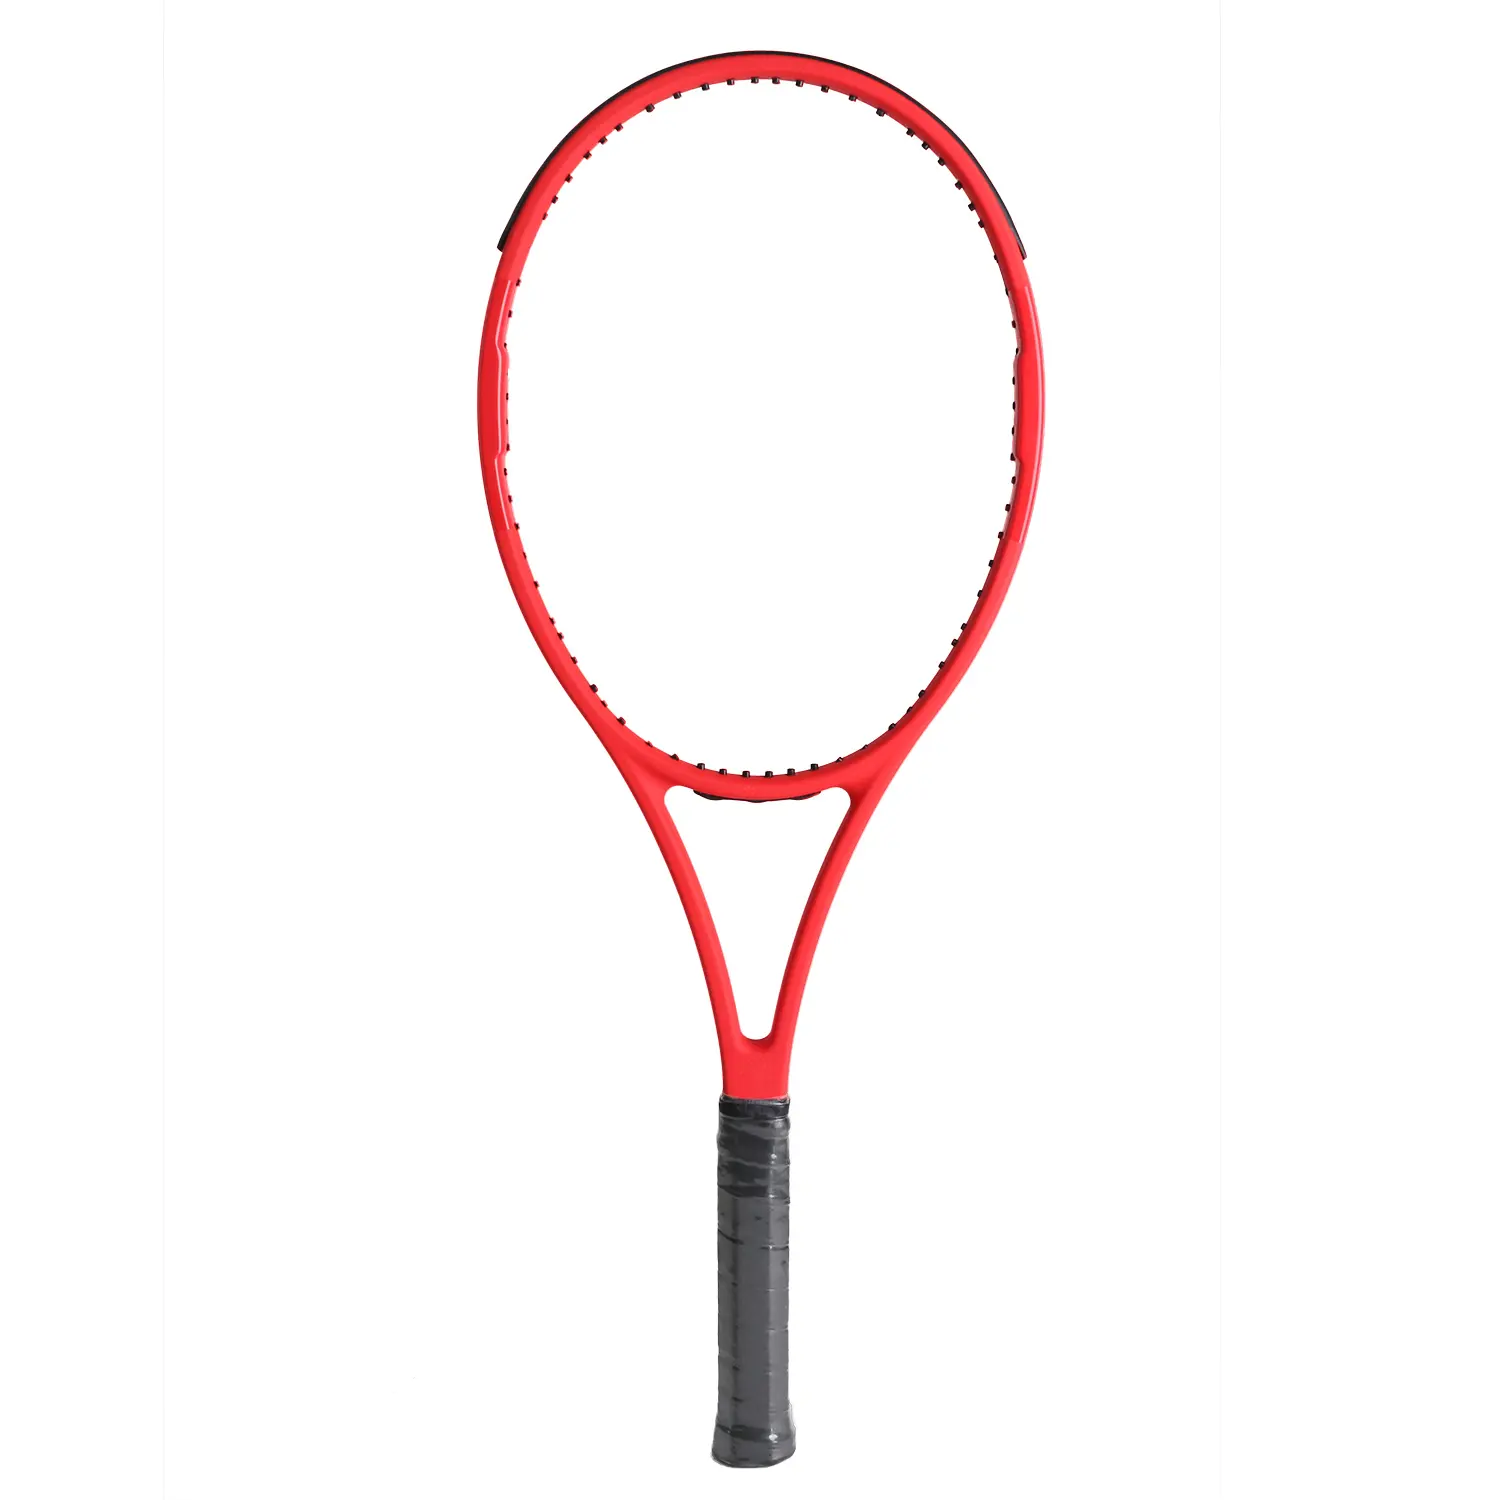 Manufacturing Low Stifiness Graphite Tennis Racket for advanced players